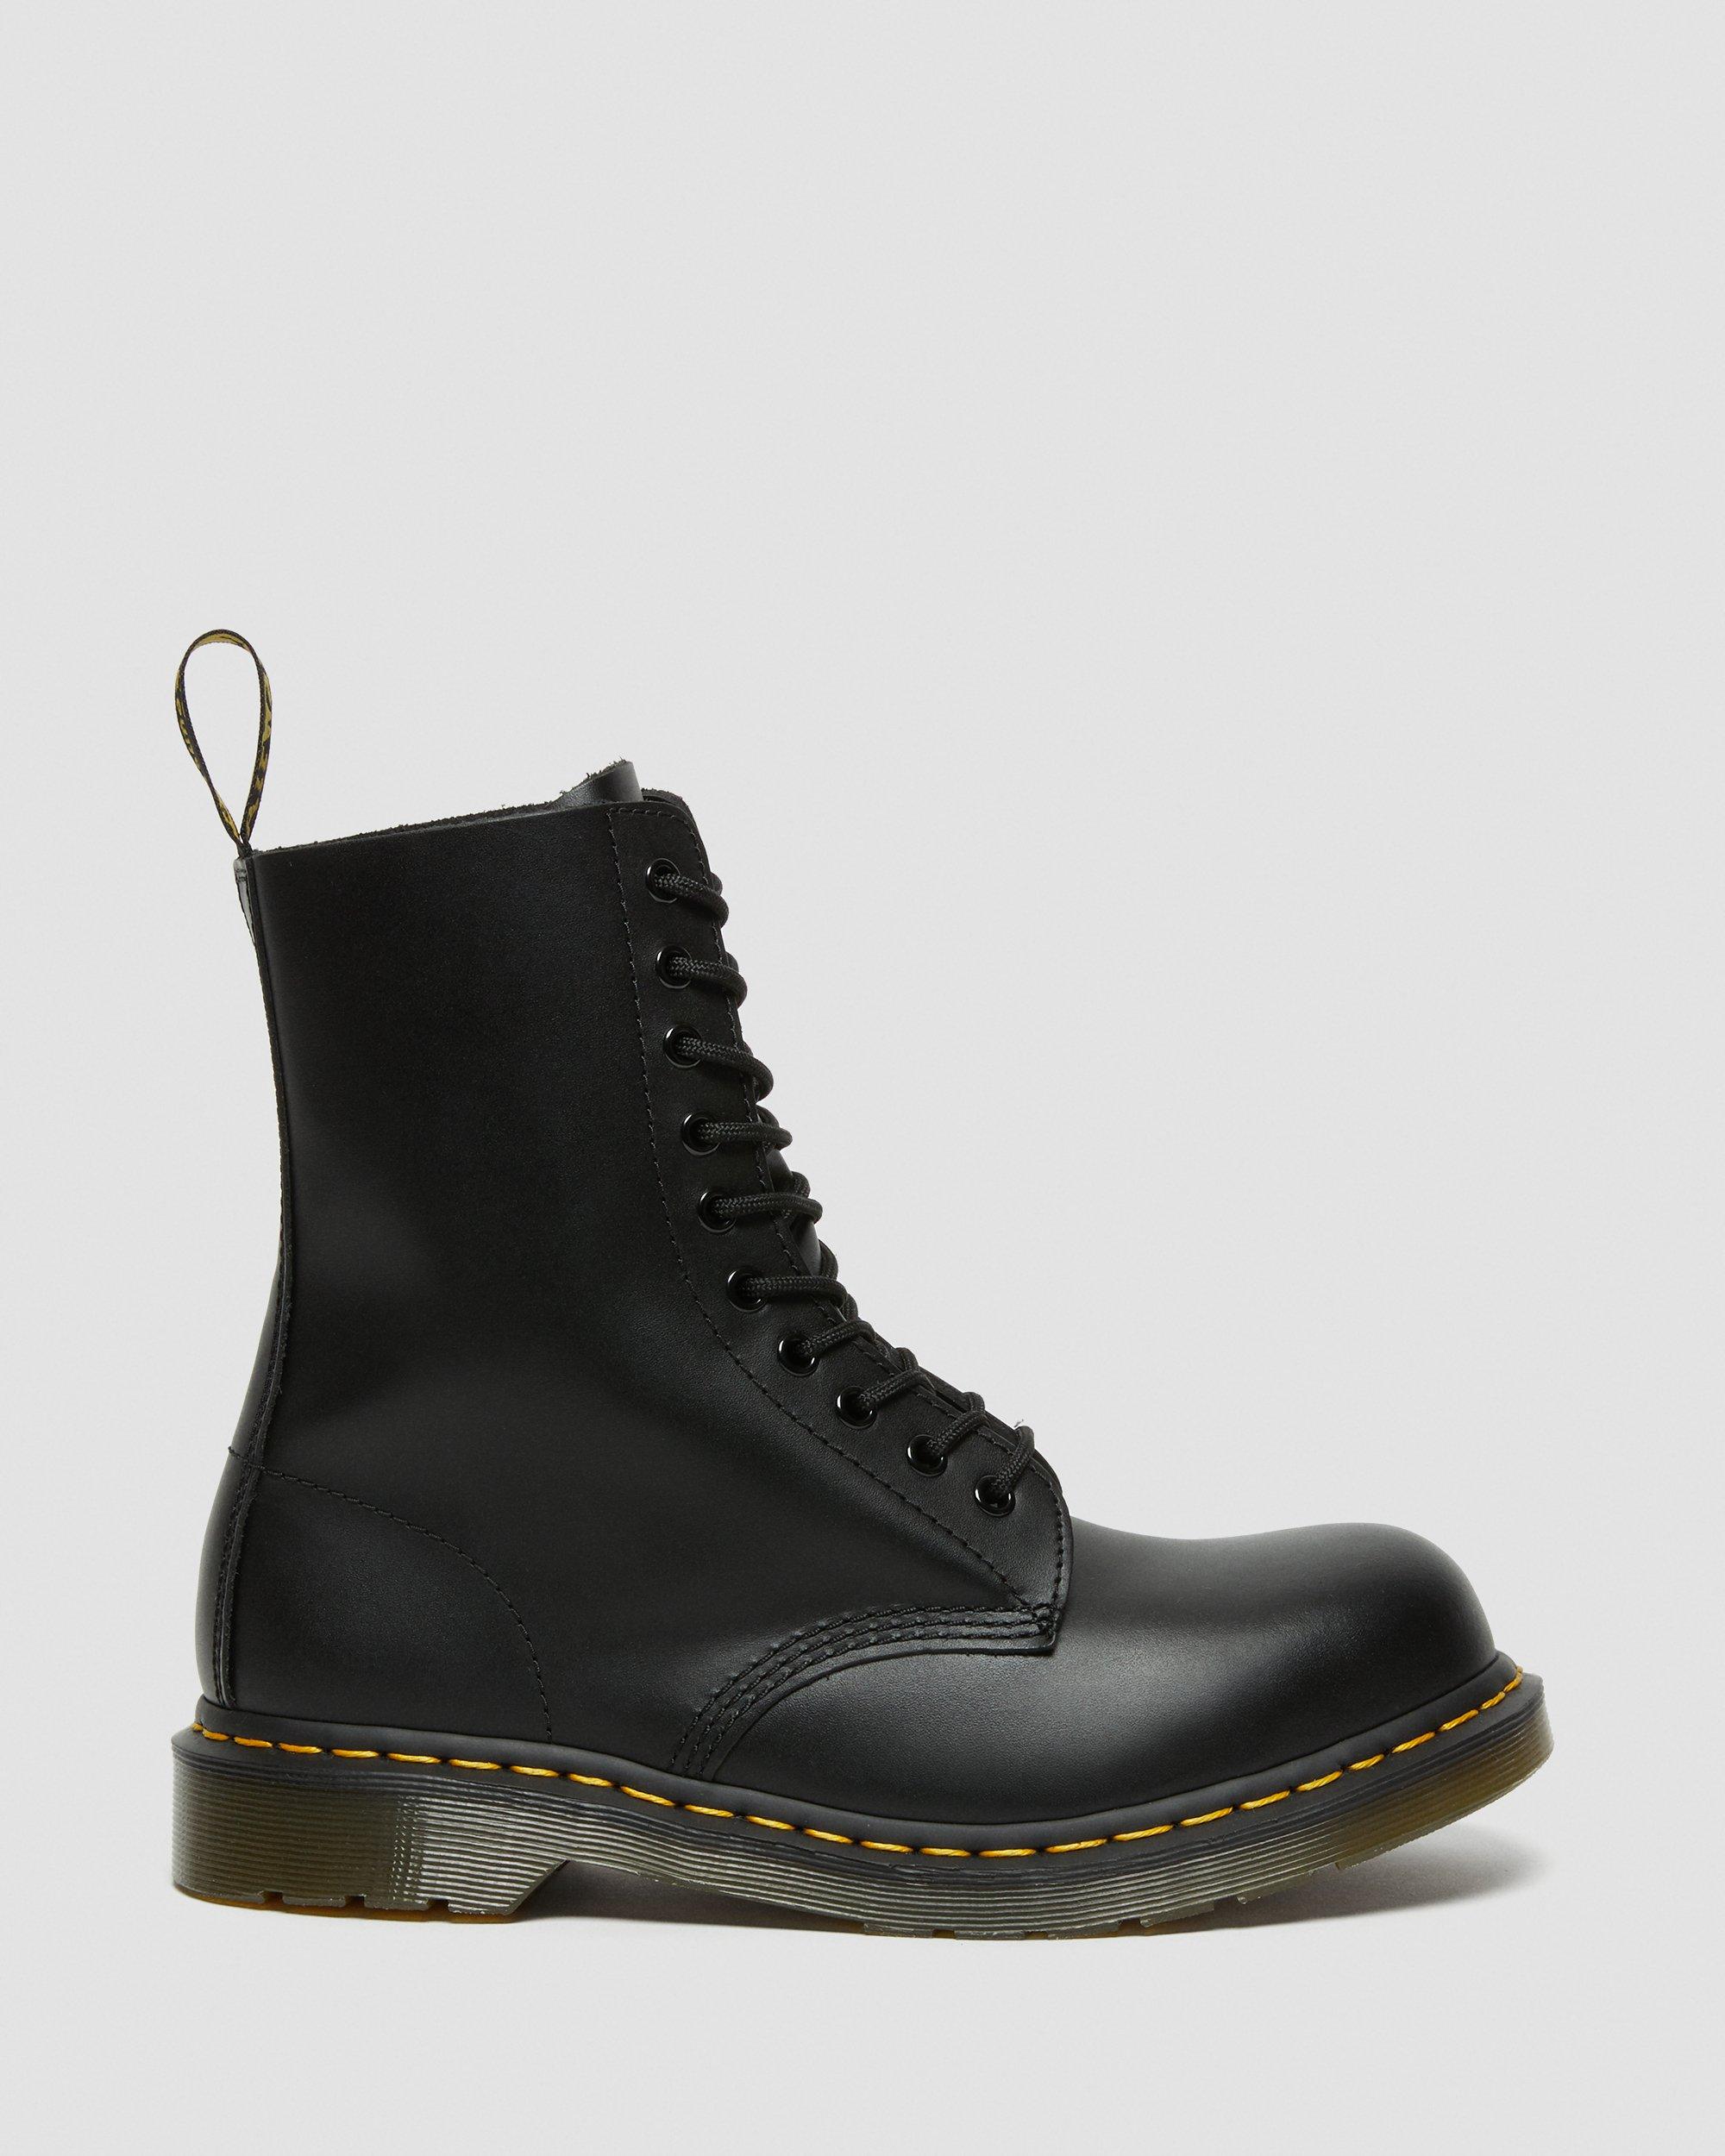 1919 LEATHER MID CALF BOOTS | Dr. Martens